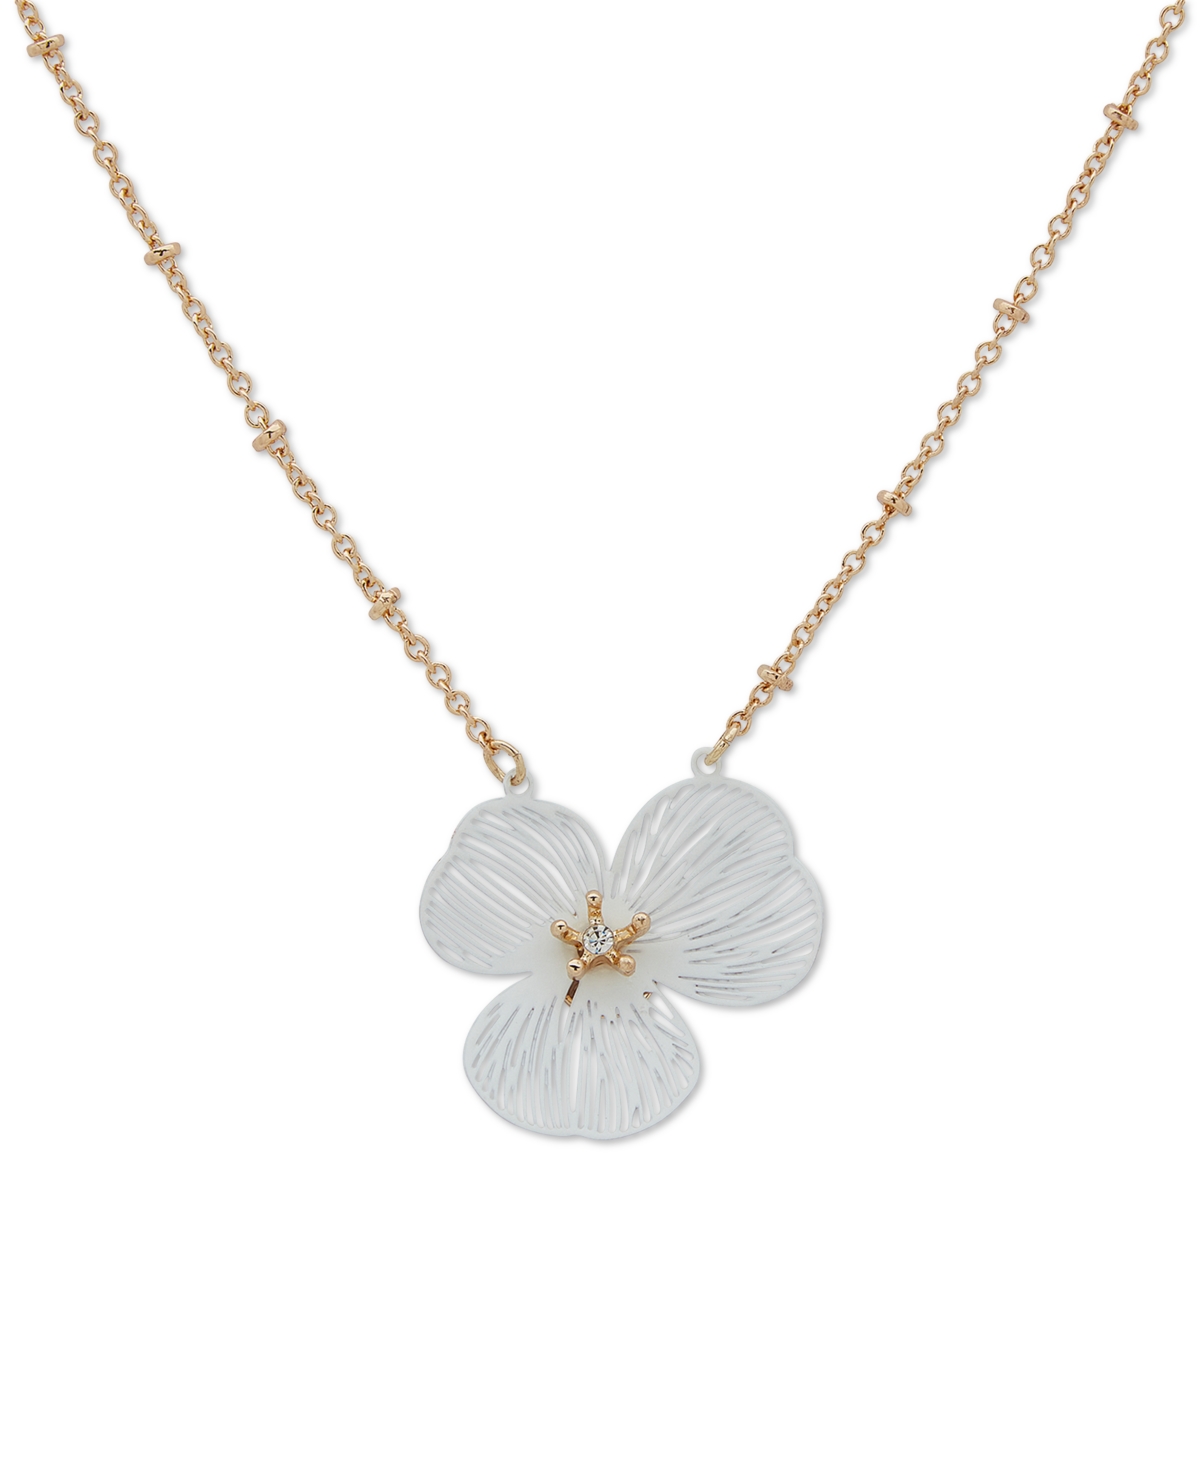 Lonna & Lilly Gold-tone Openwork Flower Pendant Necklace, 16" + 3" Extender In White